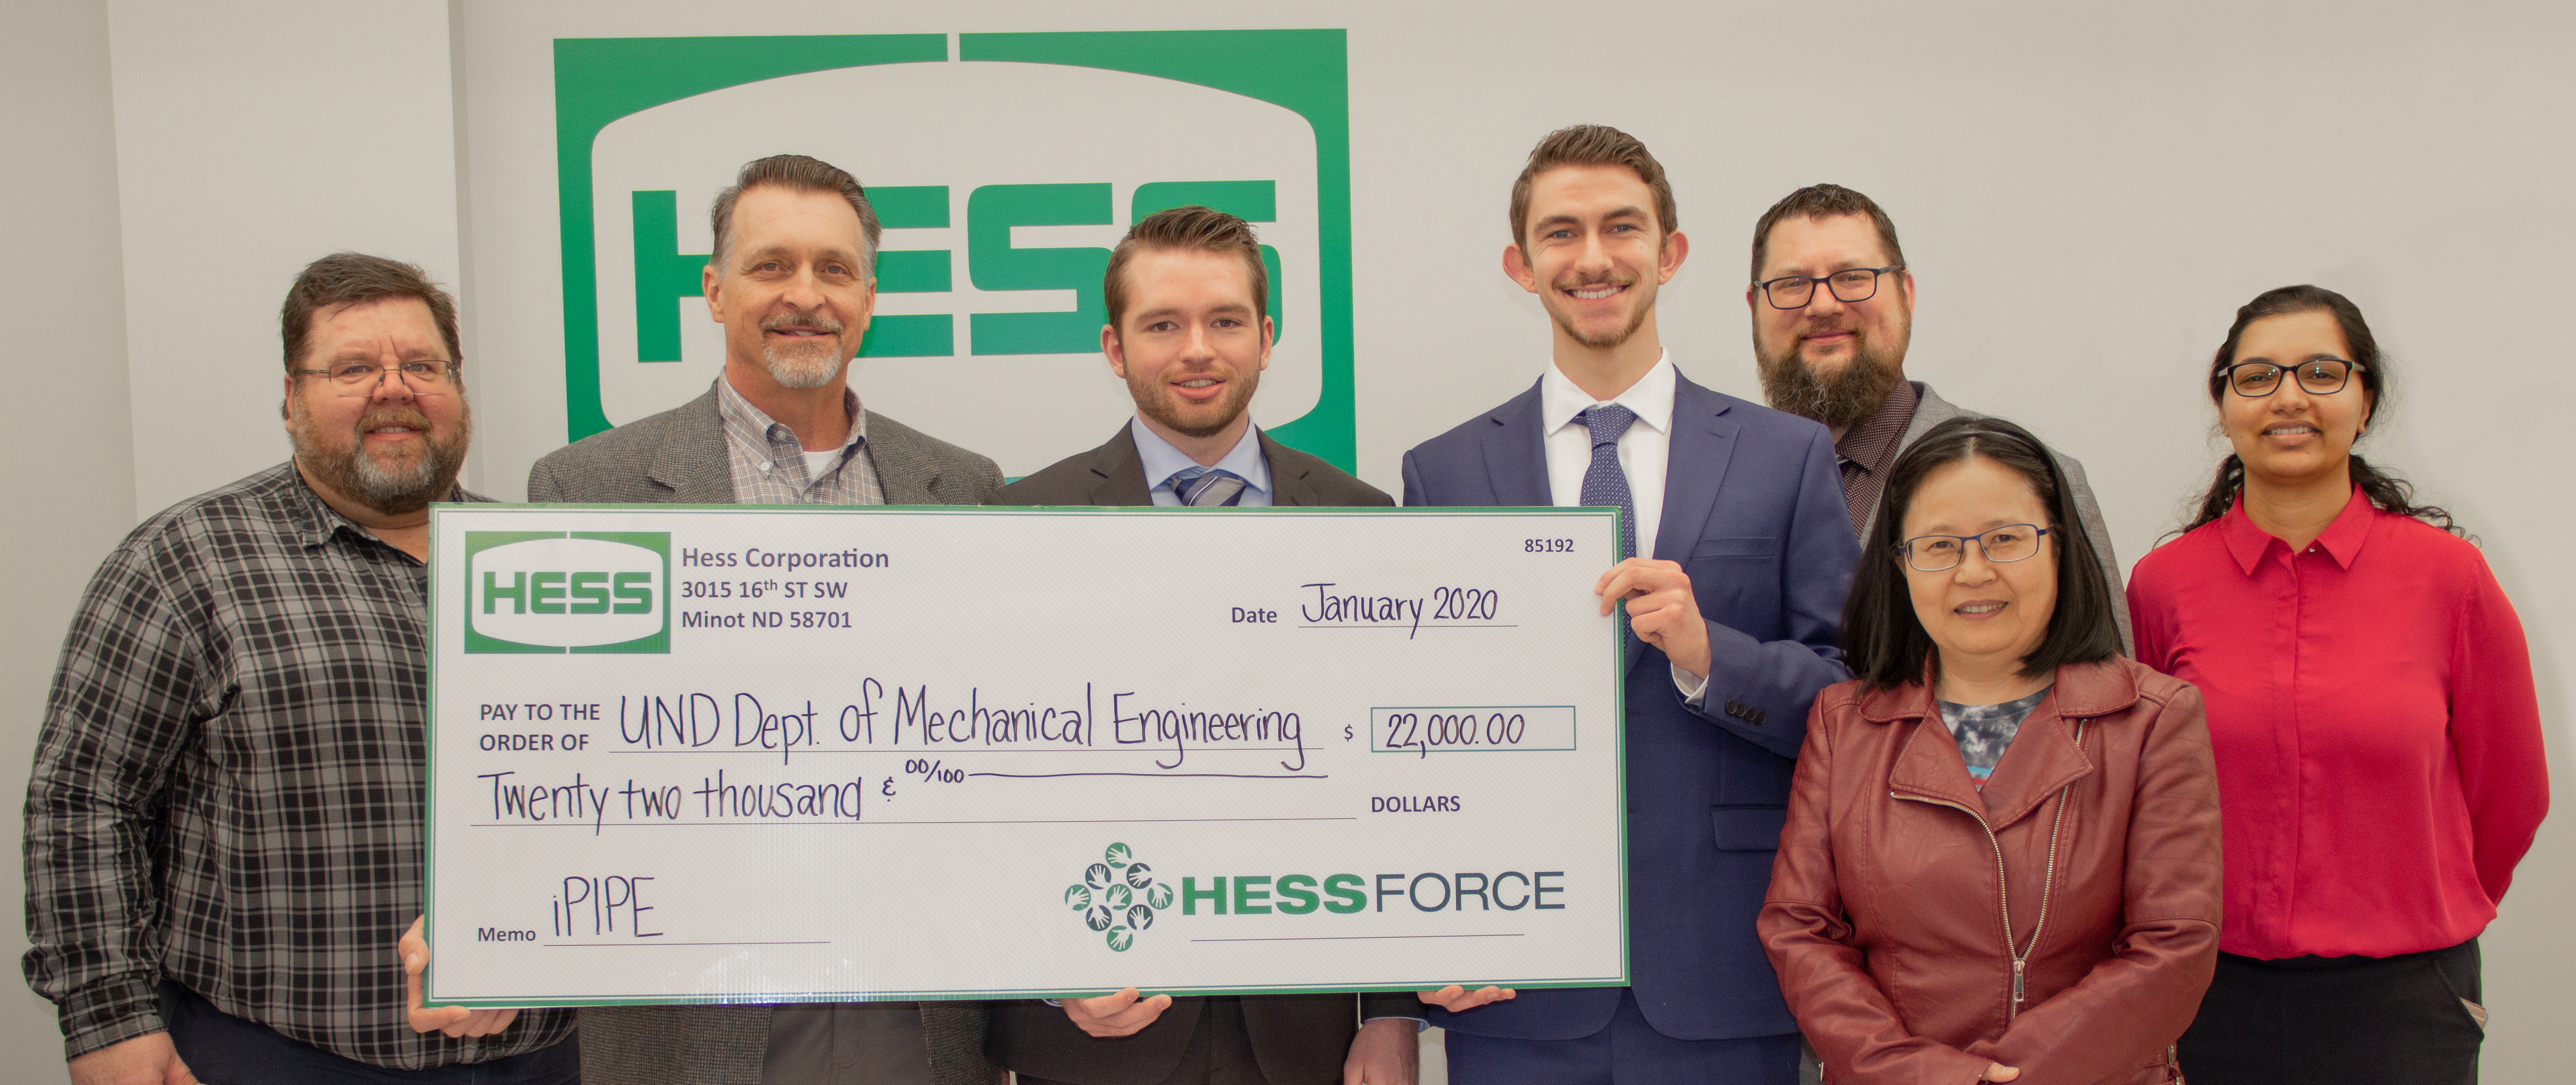 Hess presents check to Mechanical Engineering